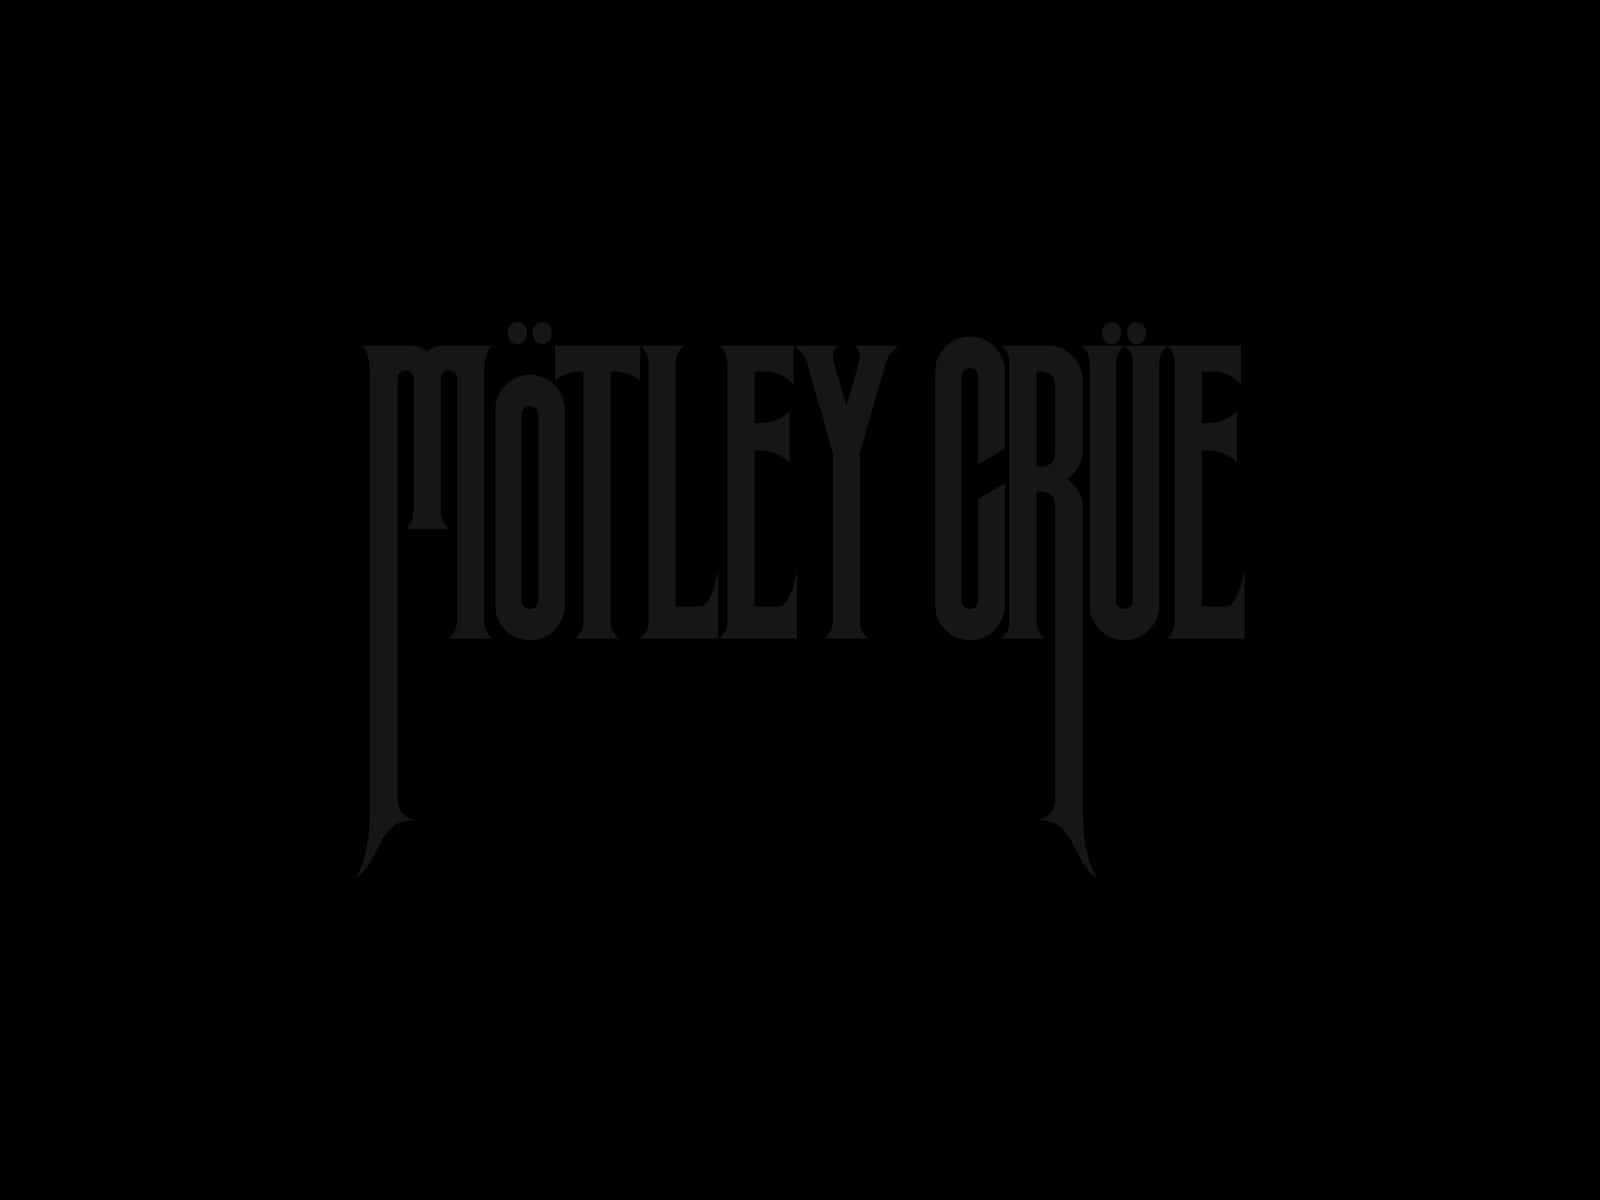 Motley Crue rocking the crowd at a sold-out stadium show Wallpaper